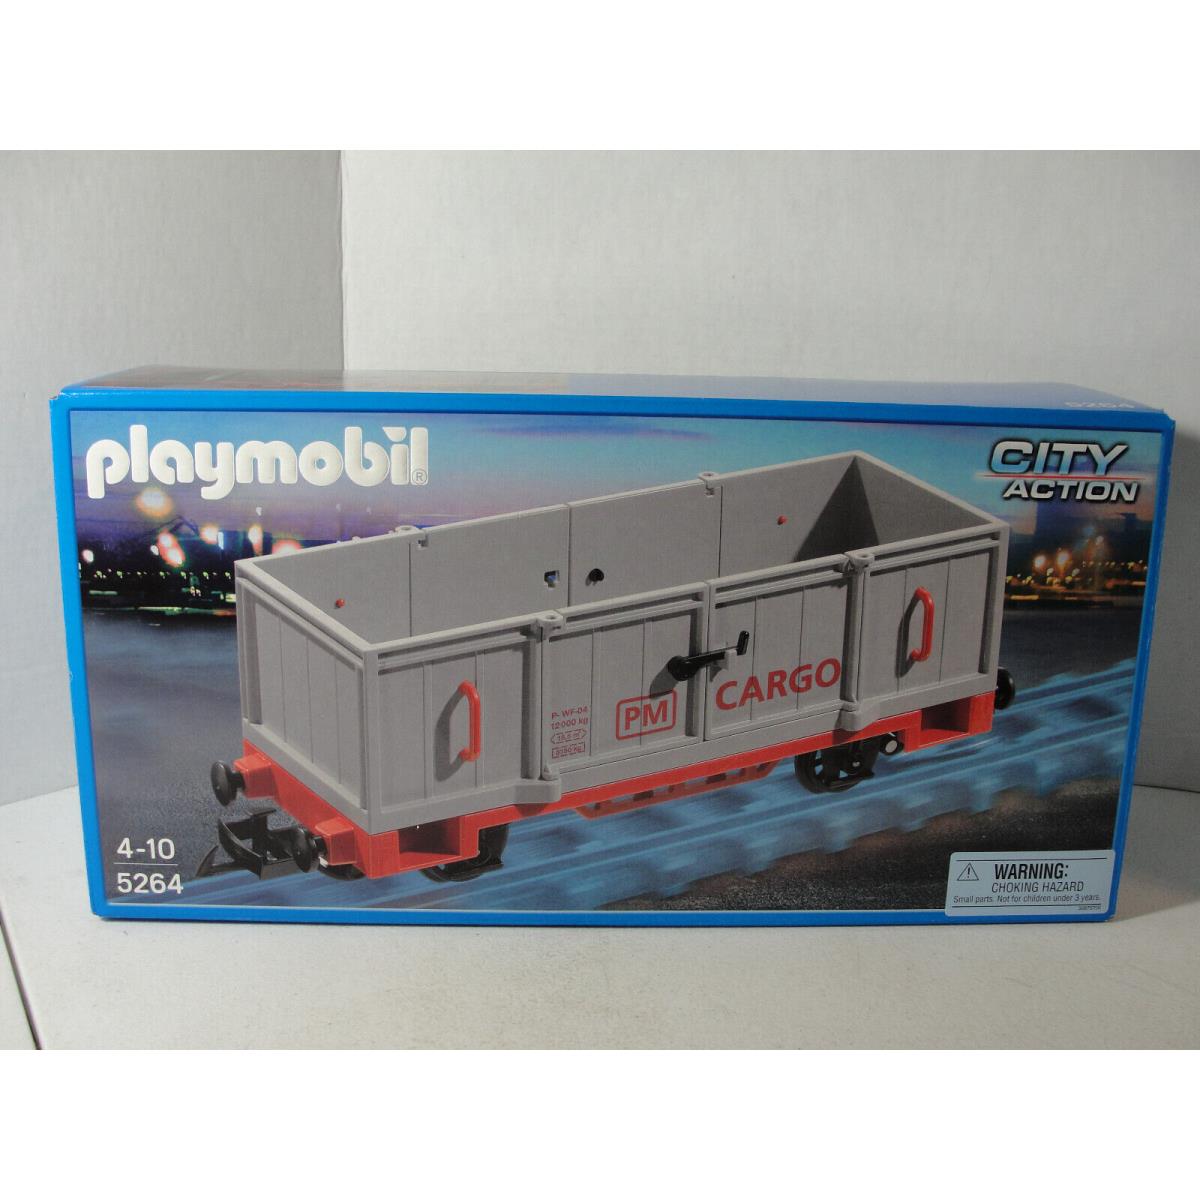 Playmobil 5264 City Action Open Freight Car